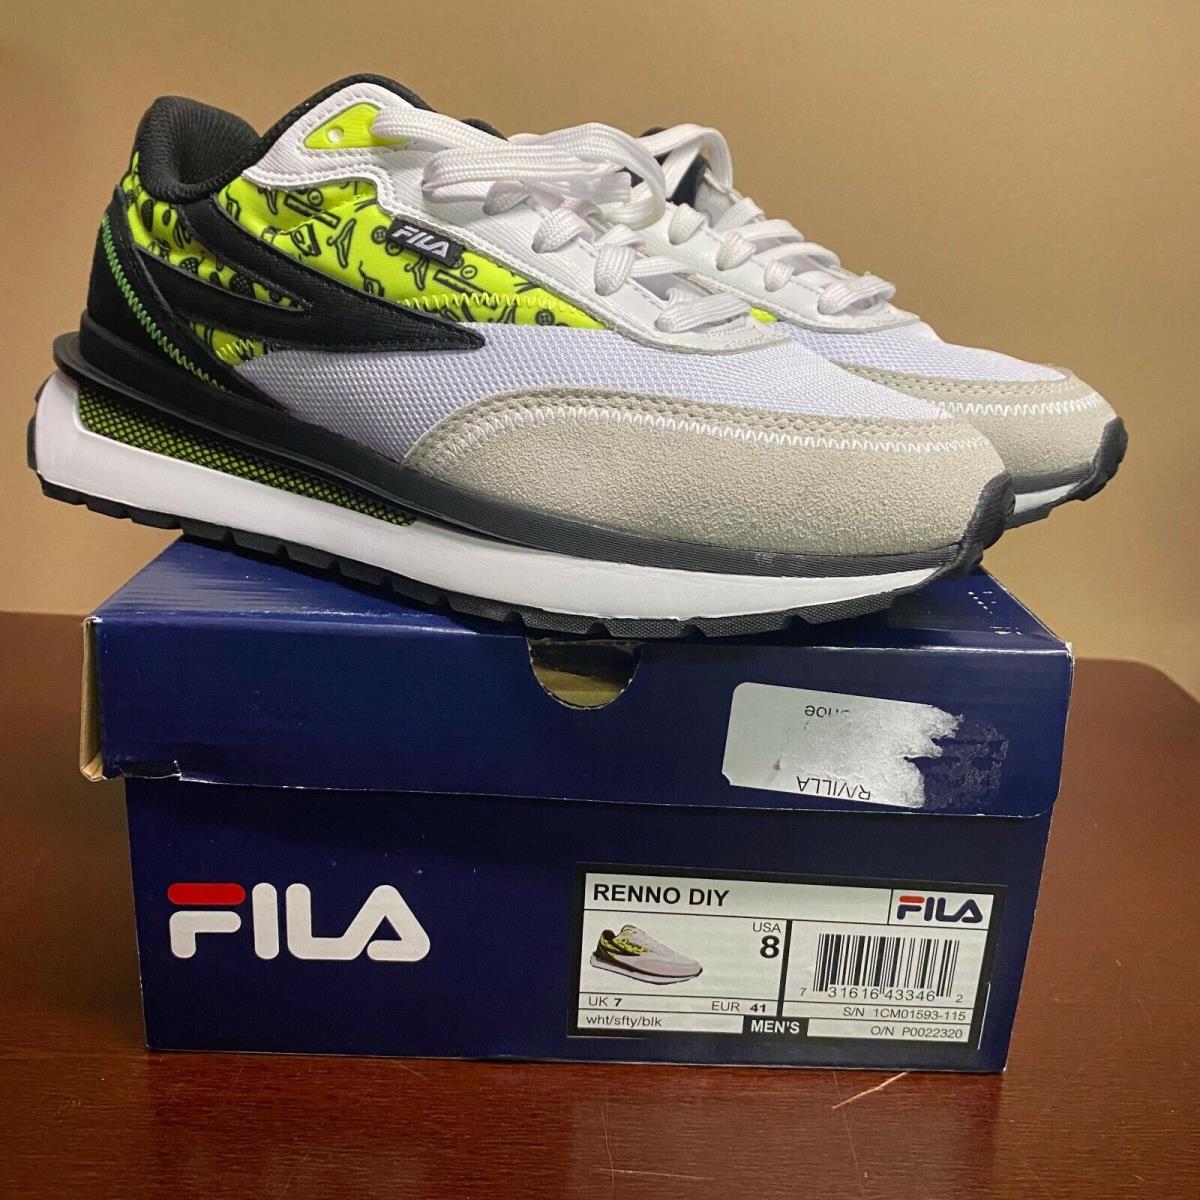 Fila Mens White Black Renno Diy Lace Up Low Top Athletic Running Shoes Size US 8